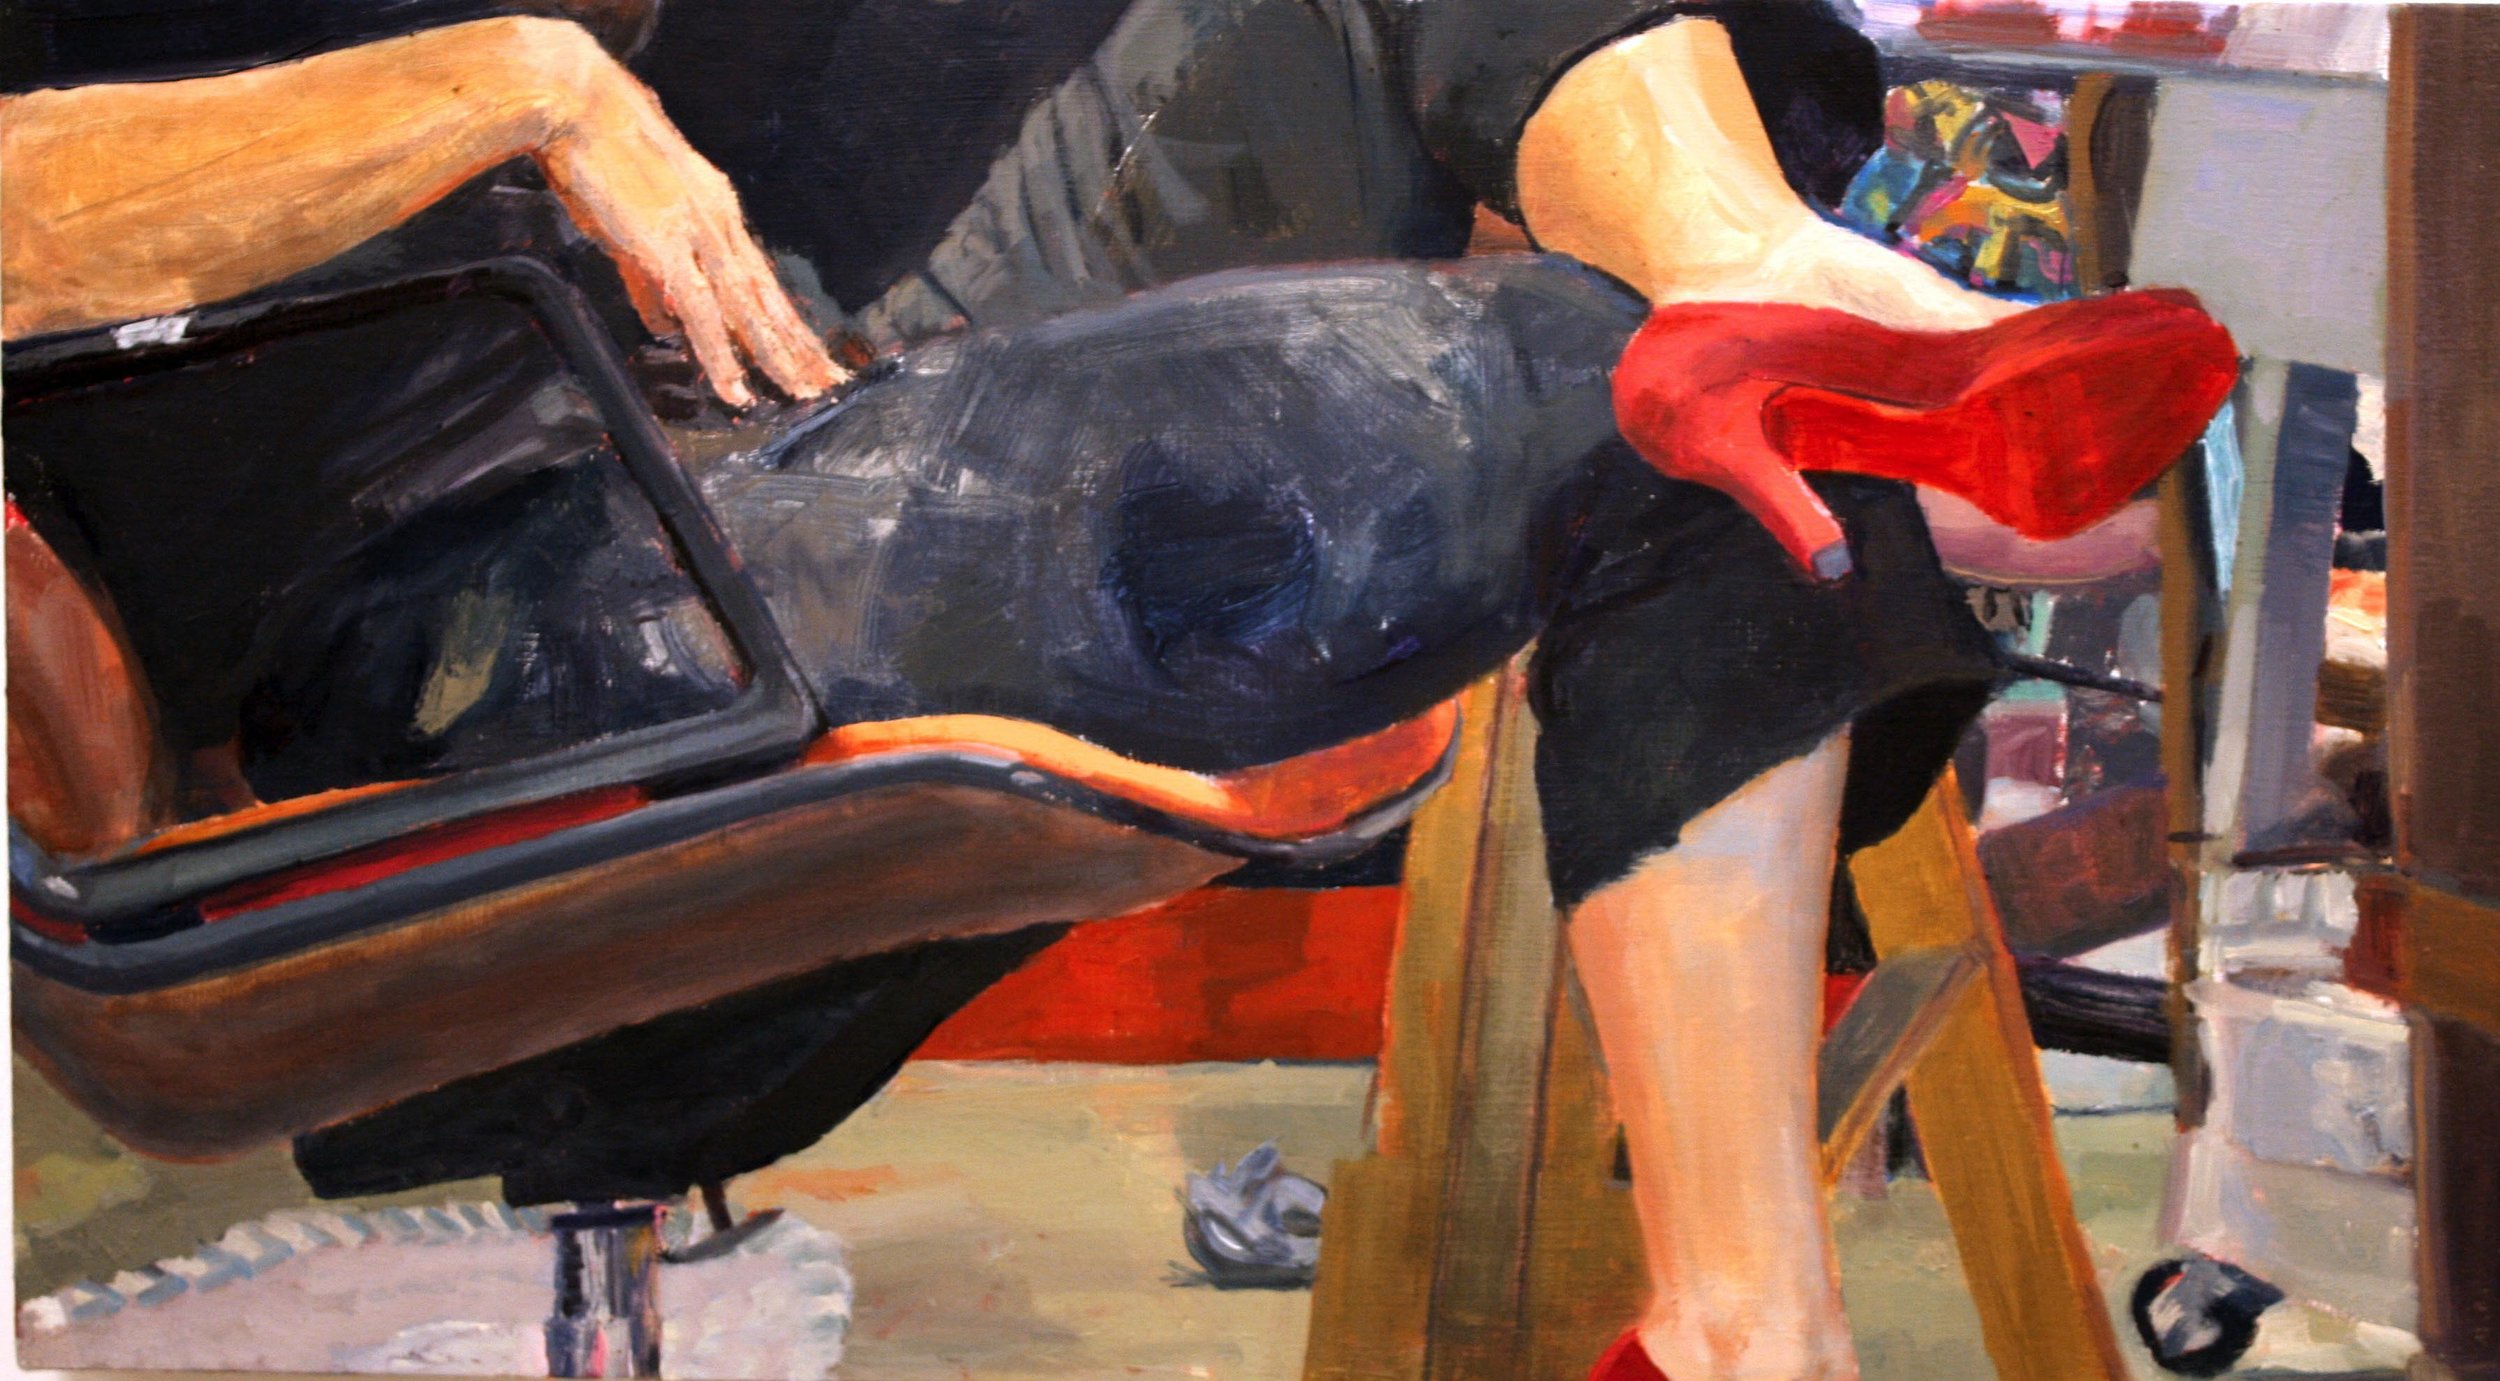   The Red Shoes , 2009. Oil on canvas, 24 x 42" 